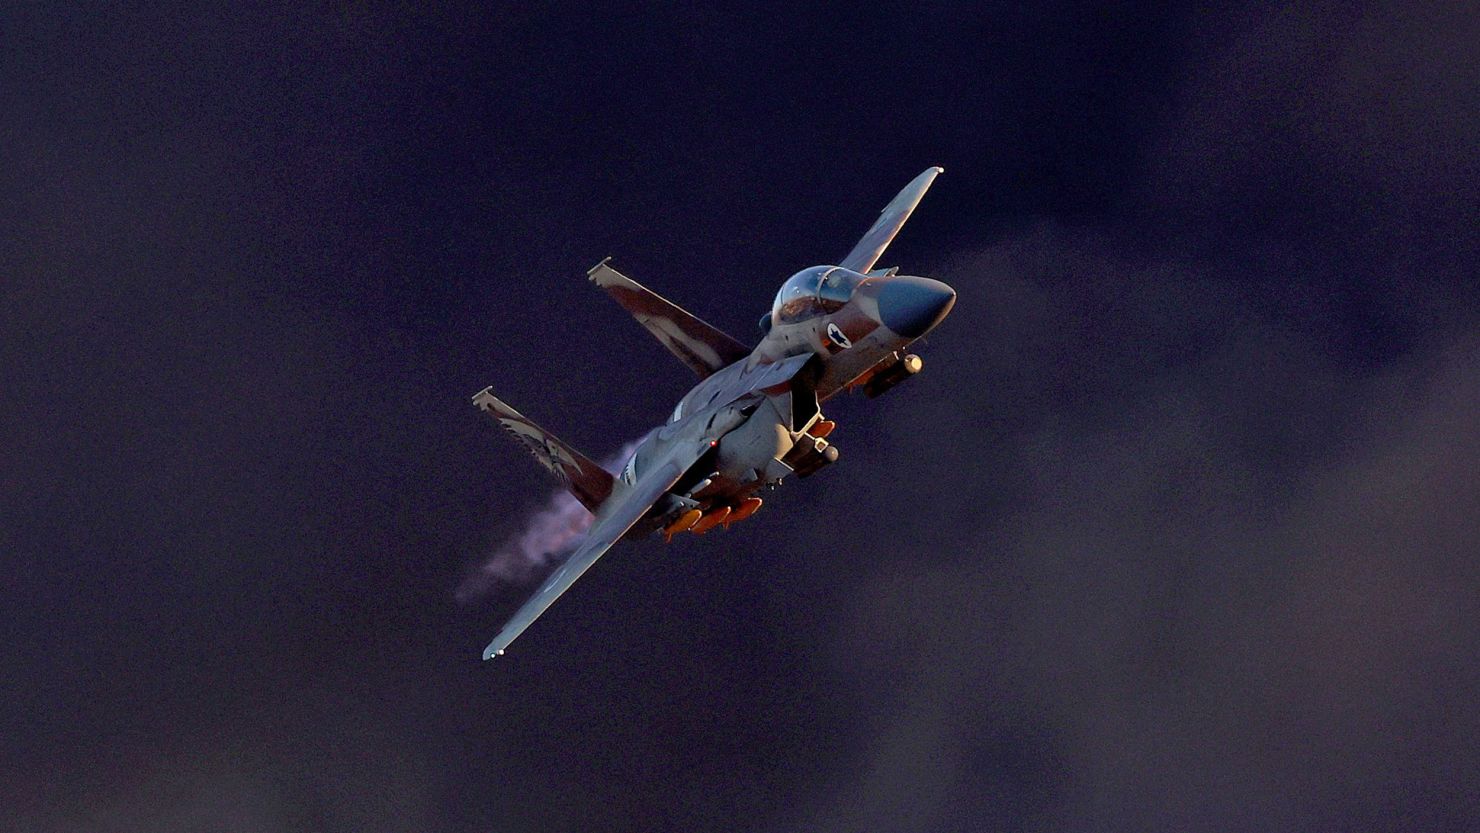 Israel's F-15E Strike Eagle fighter performs maneuvers during the graduation ceremony of Israeli Air Force pilots at the Hatzerim base in the Negev desert on June 29, 2023.